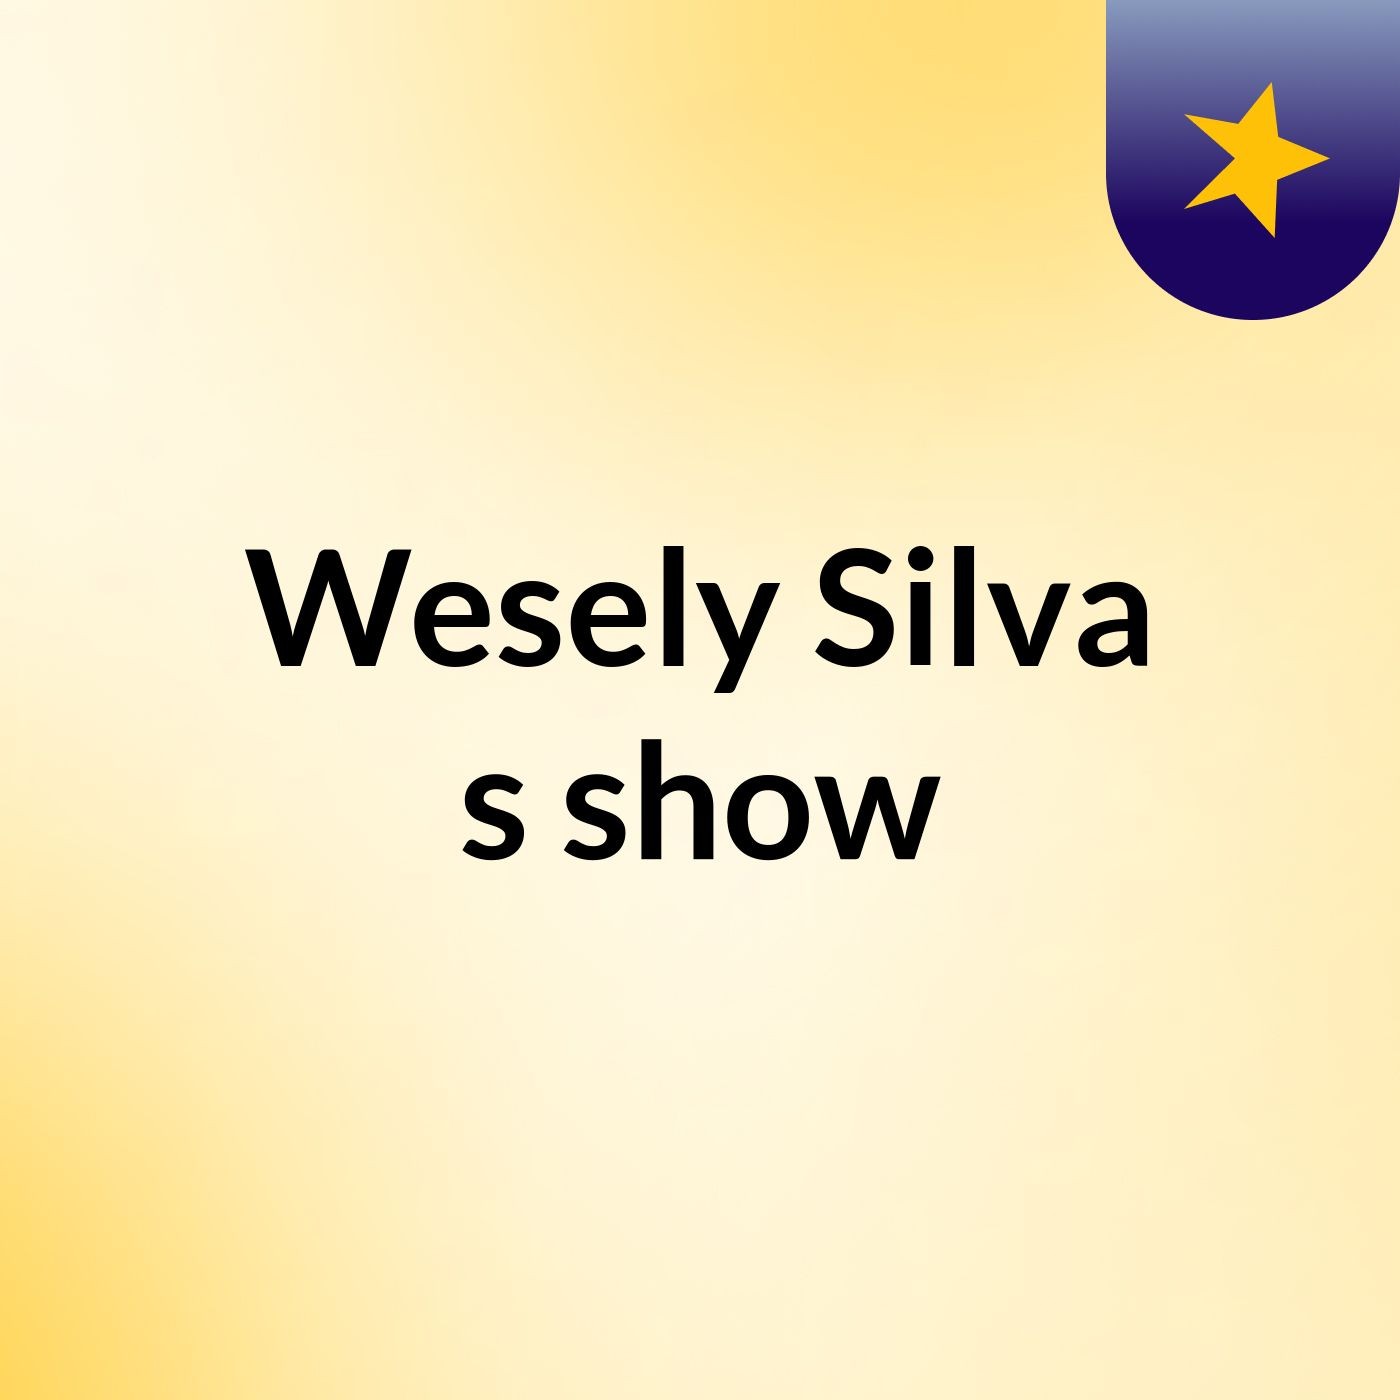 Wesely Silva's show